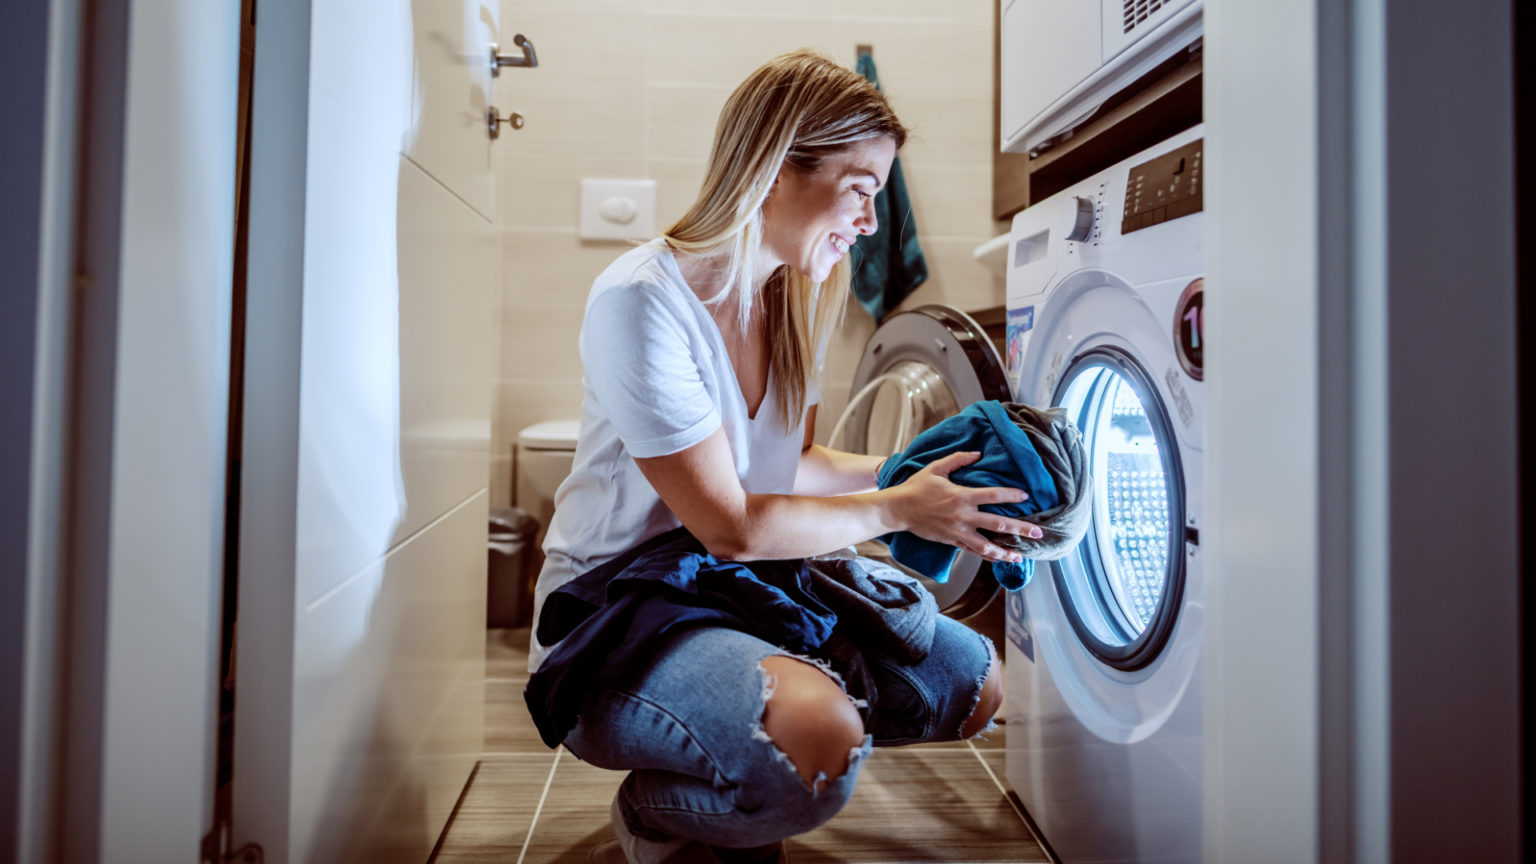 LG Washing Machine Leaking? How to Fix It - Appliance Repair Specialists